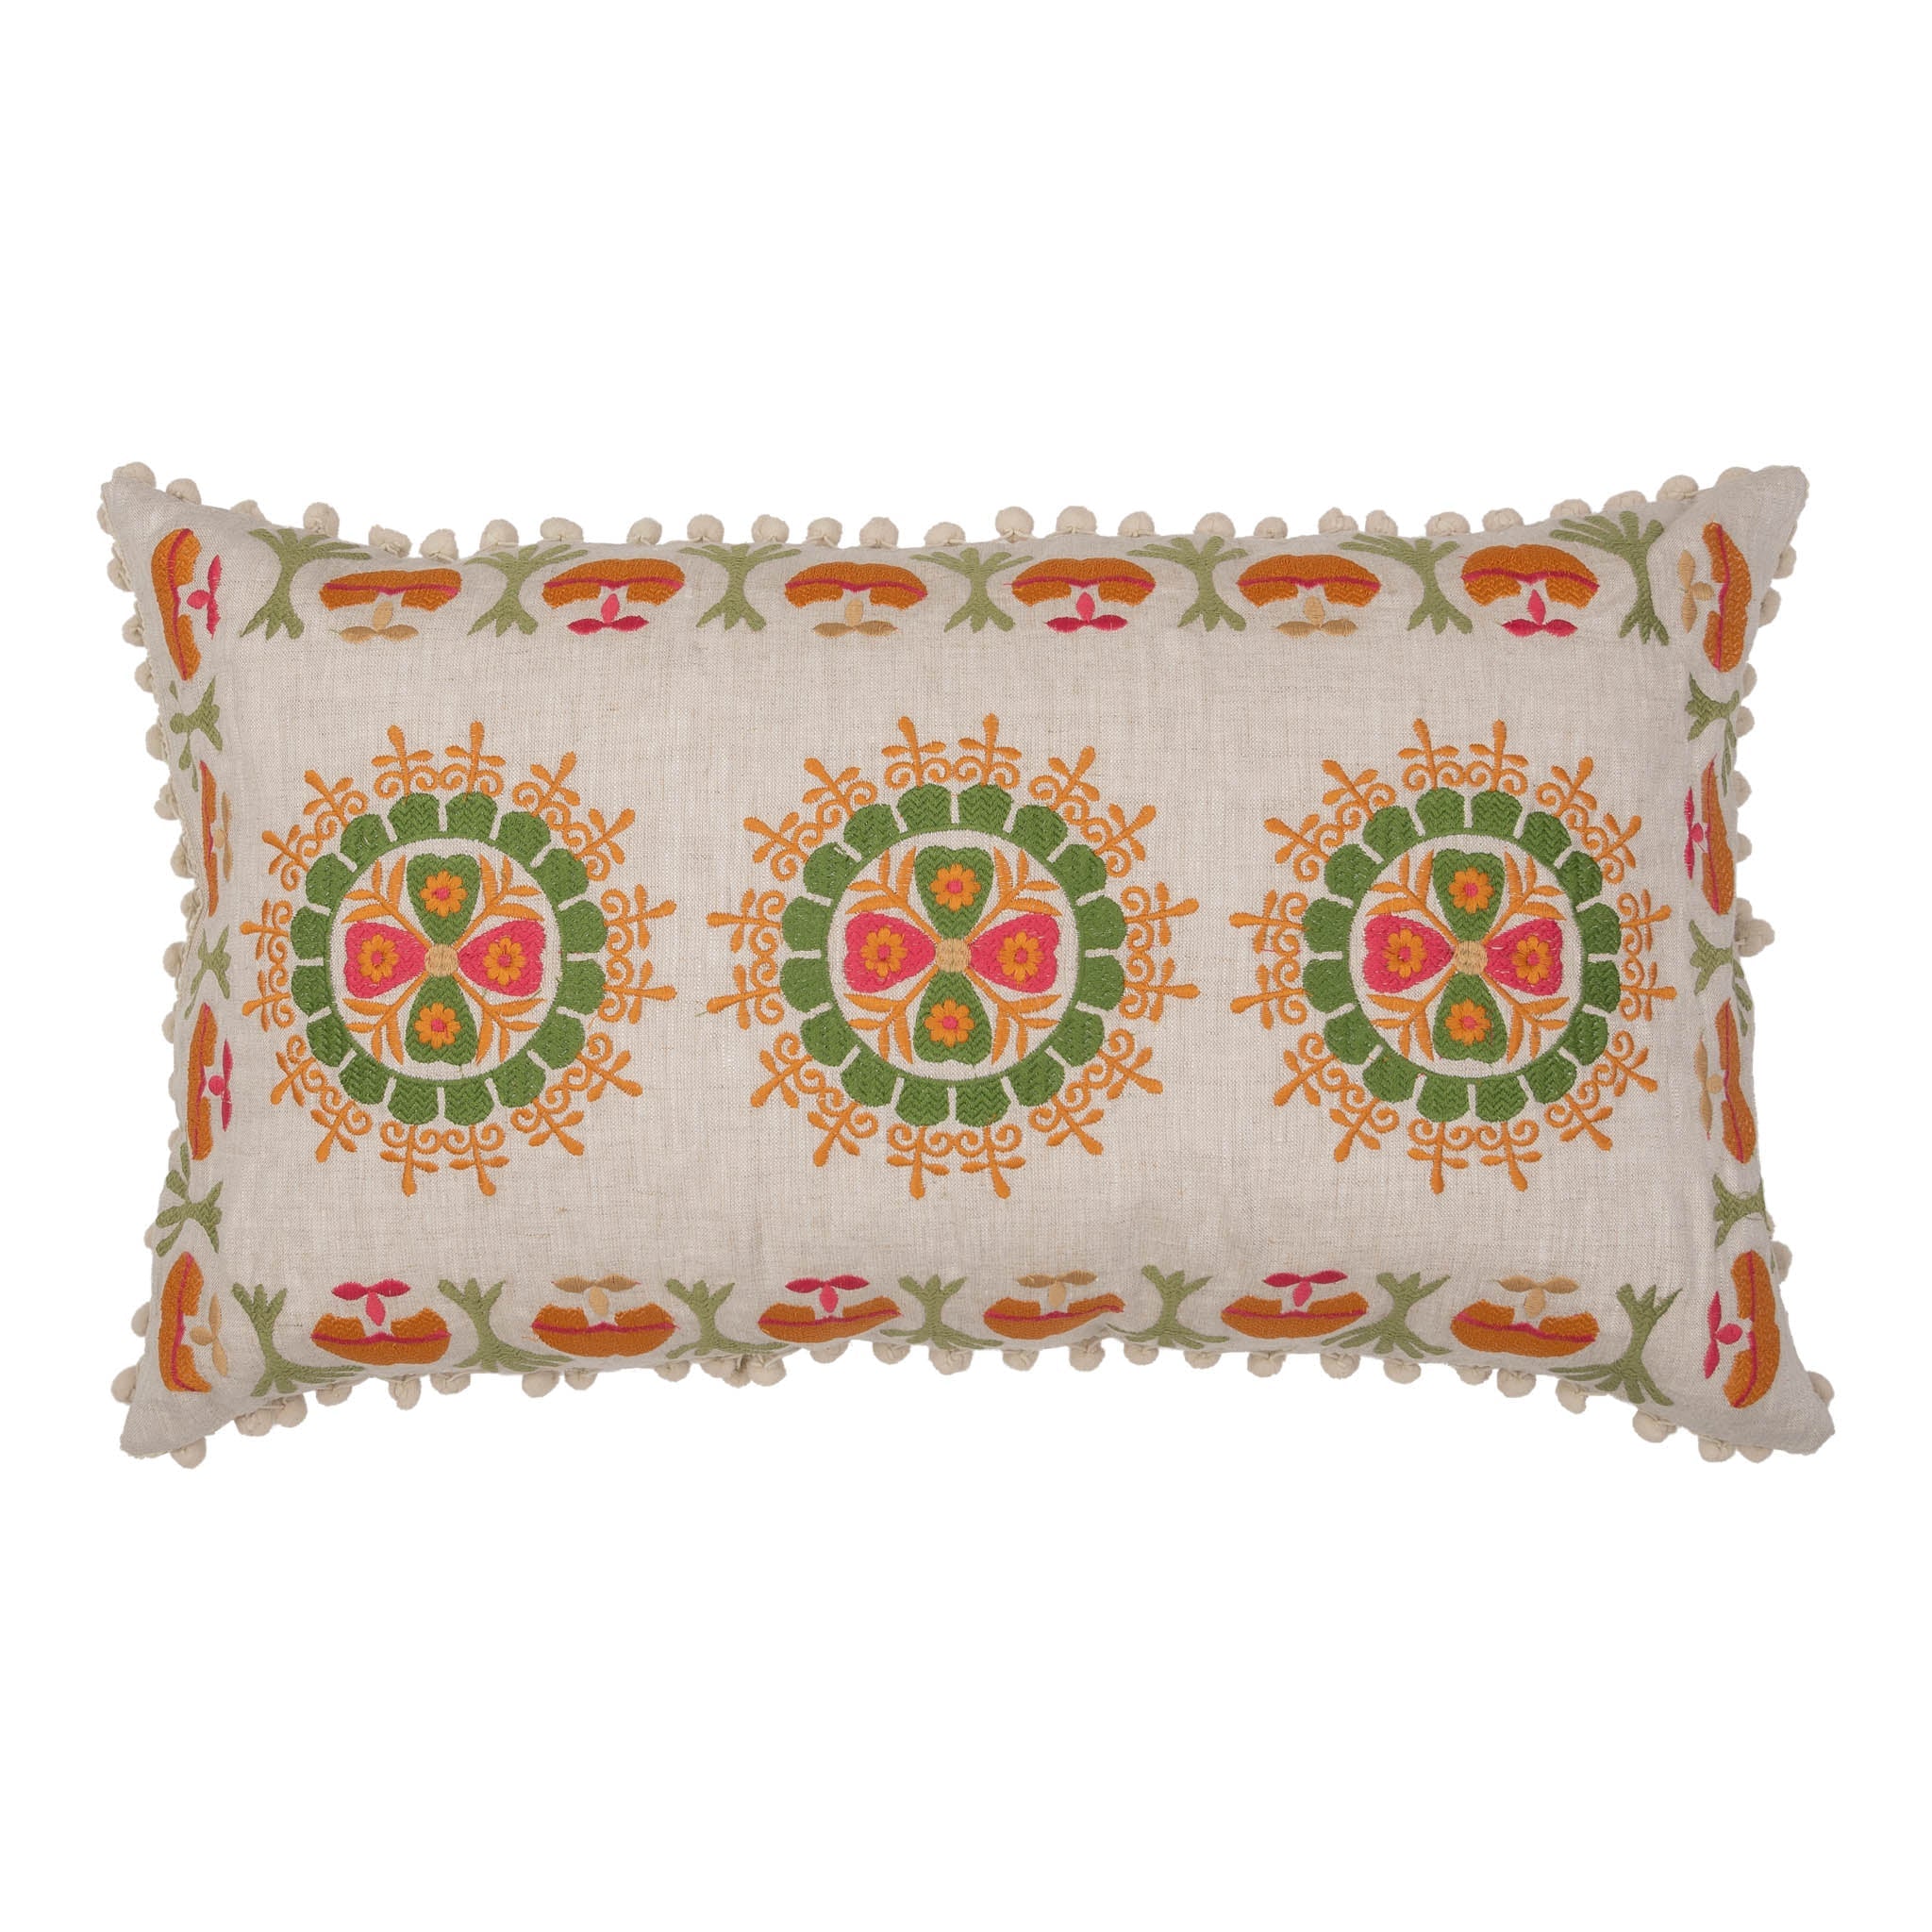 Orange and Green Embroidered Folk Cushion with White Pom-Poms